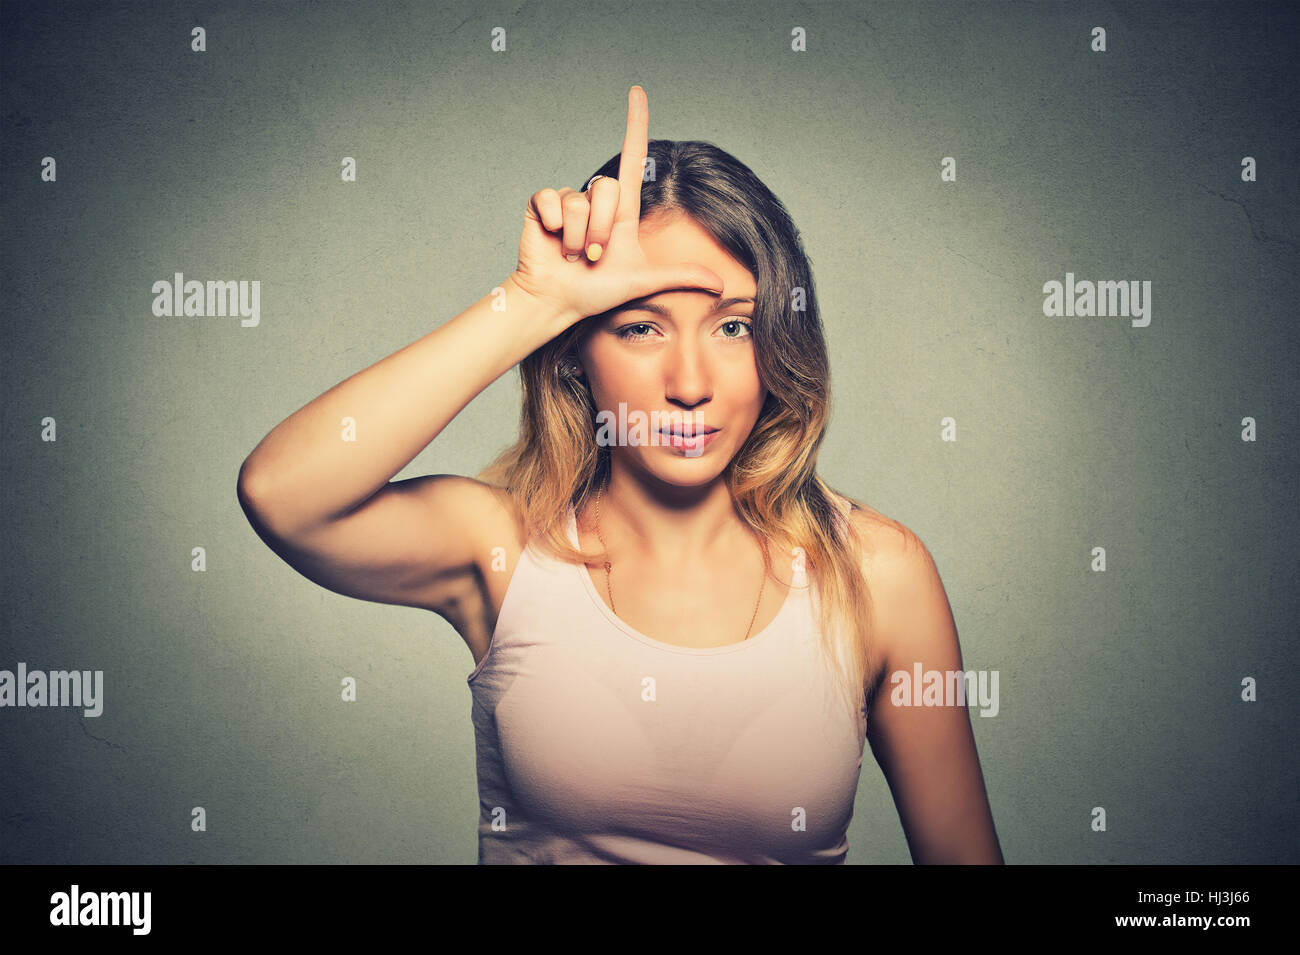 Closeup portrait young unhappy woman giving loser sign on forehead, looking at you, disgust on face isolated on gray wall background. Negative human e Stock Photo